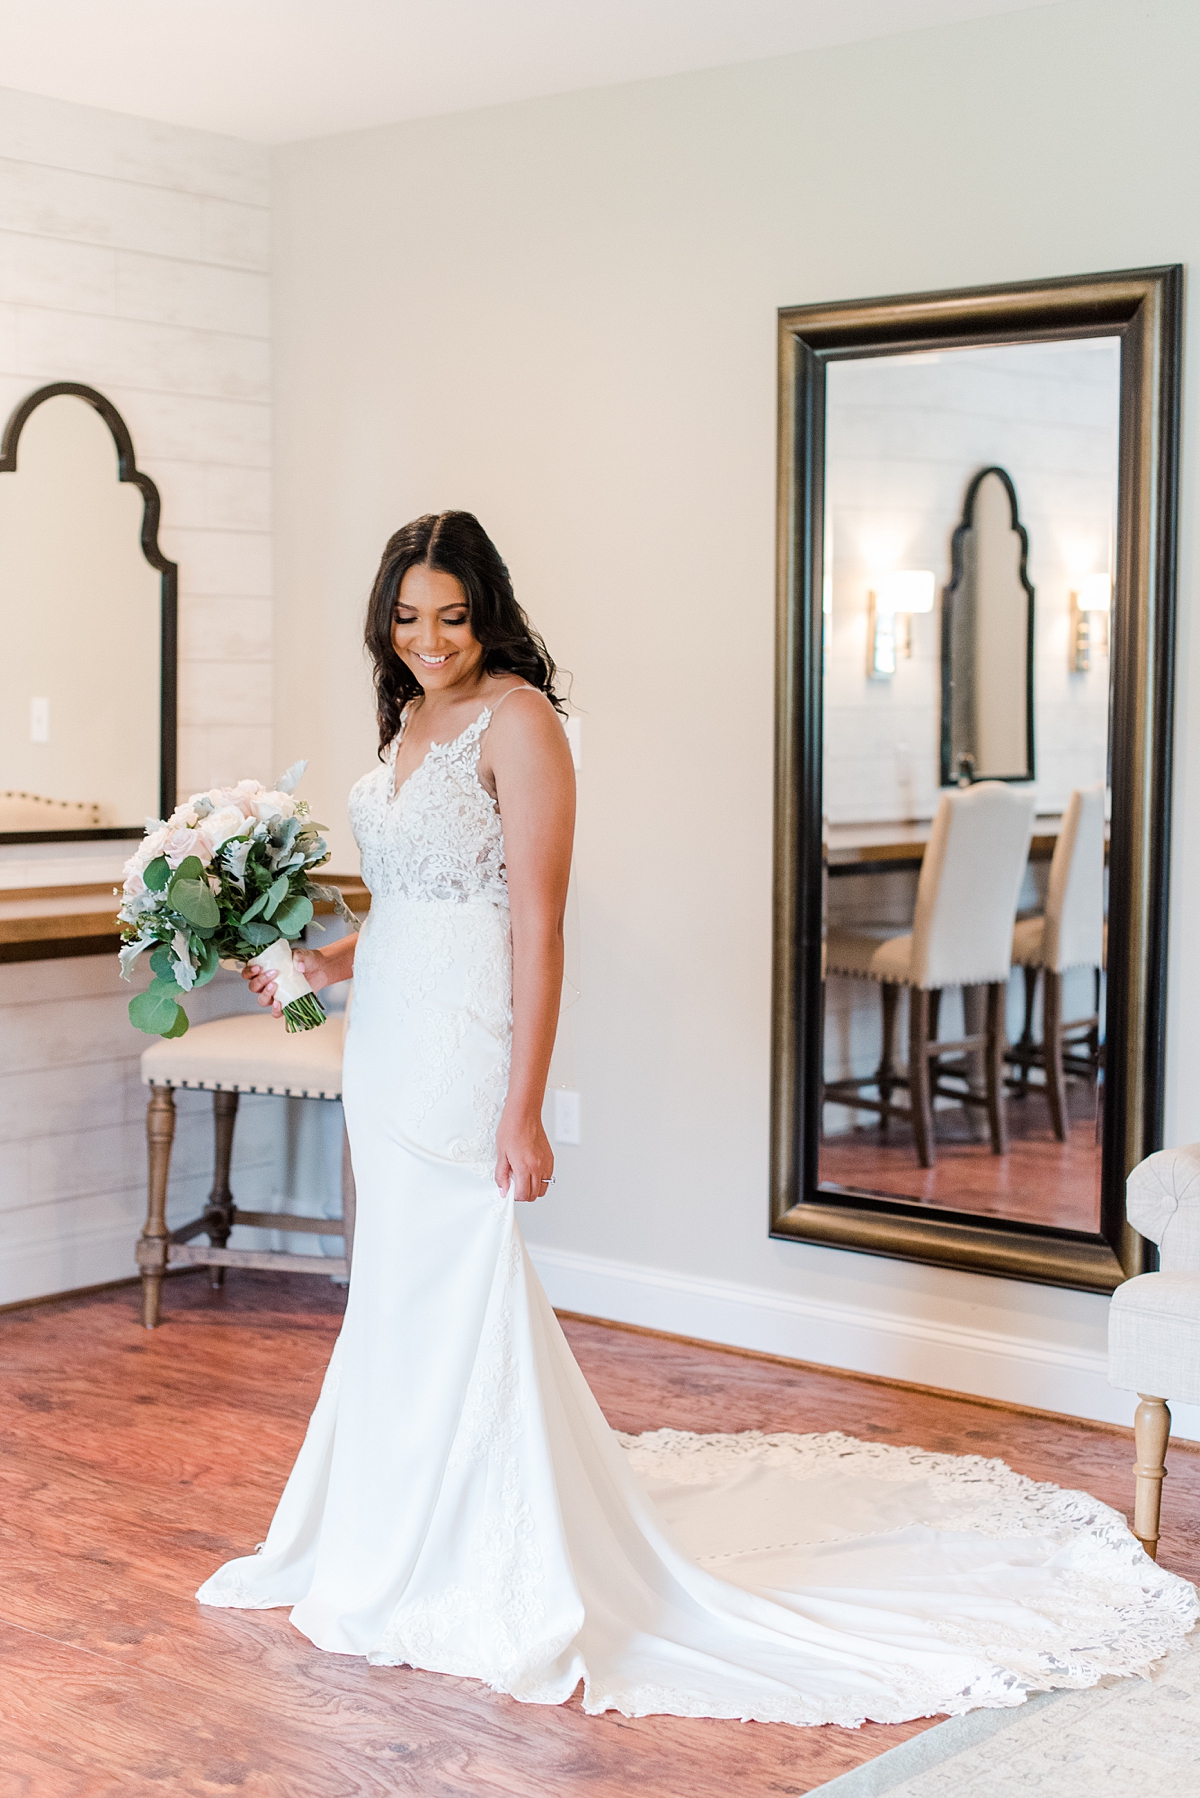 Rustic Chic Bridal Portraits in Elegant Dress at Arbor Haven Wedding. Wedding Photography by Richmond Wedding Photographer Kailey Brianne Photography. 